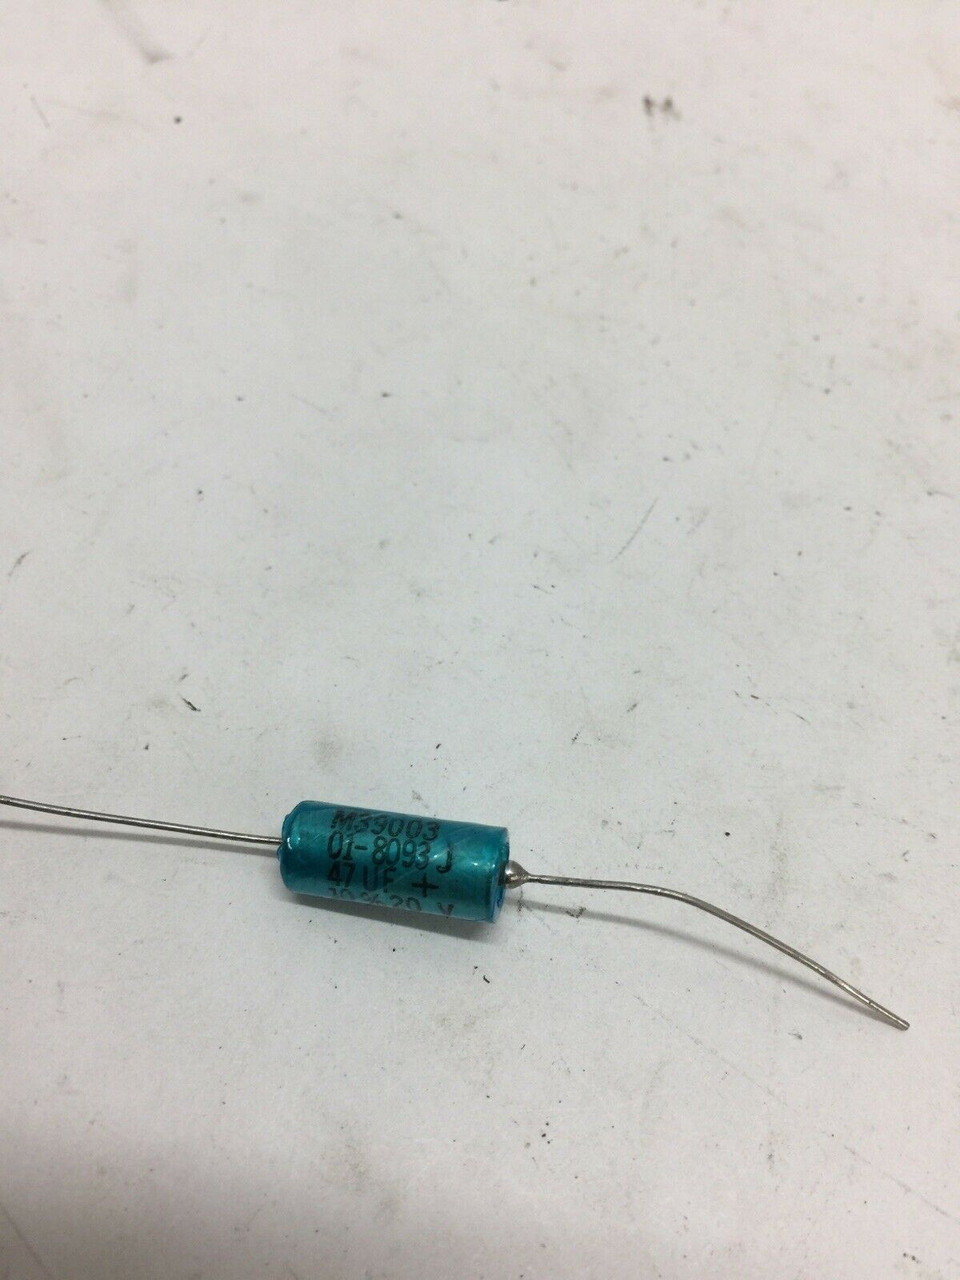 Electrolytic Fixed Capacitor M39003/01-8093